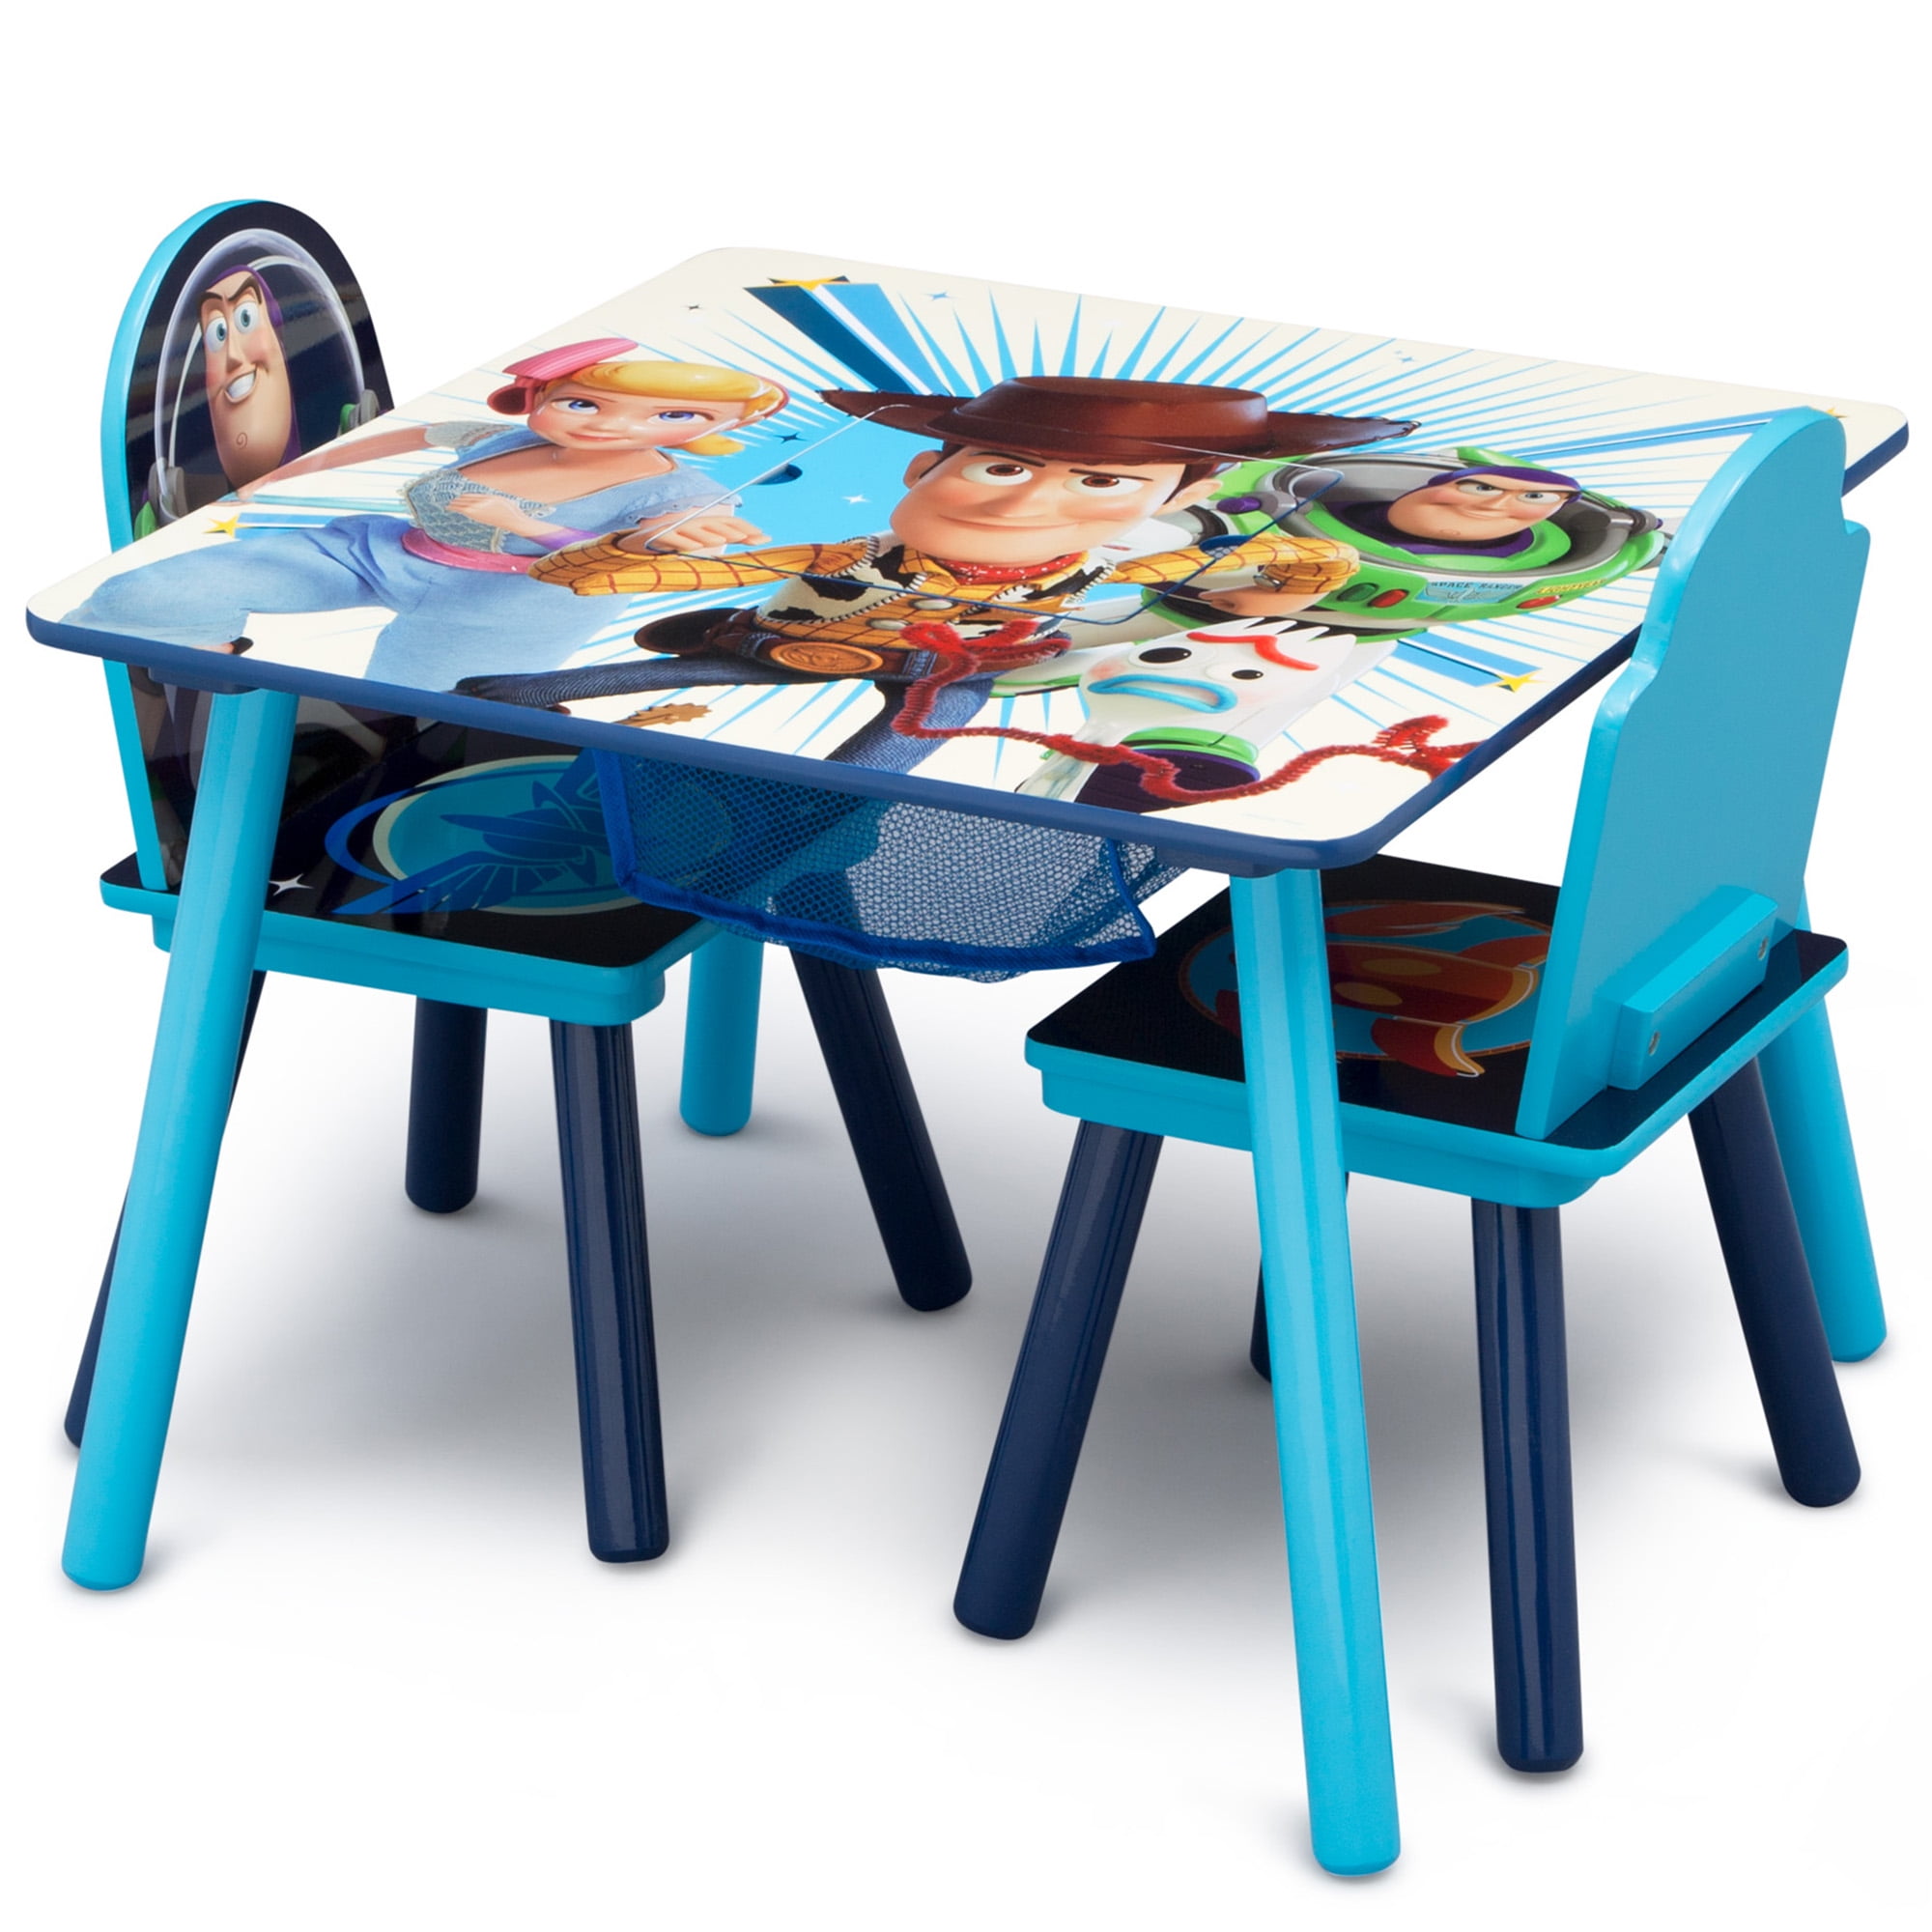 Walmart Toy Story Table And Chairs Deals, 50% OFF | www.ingeniovirtual.com